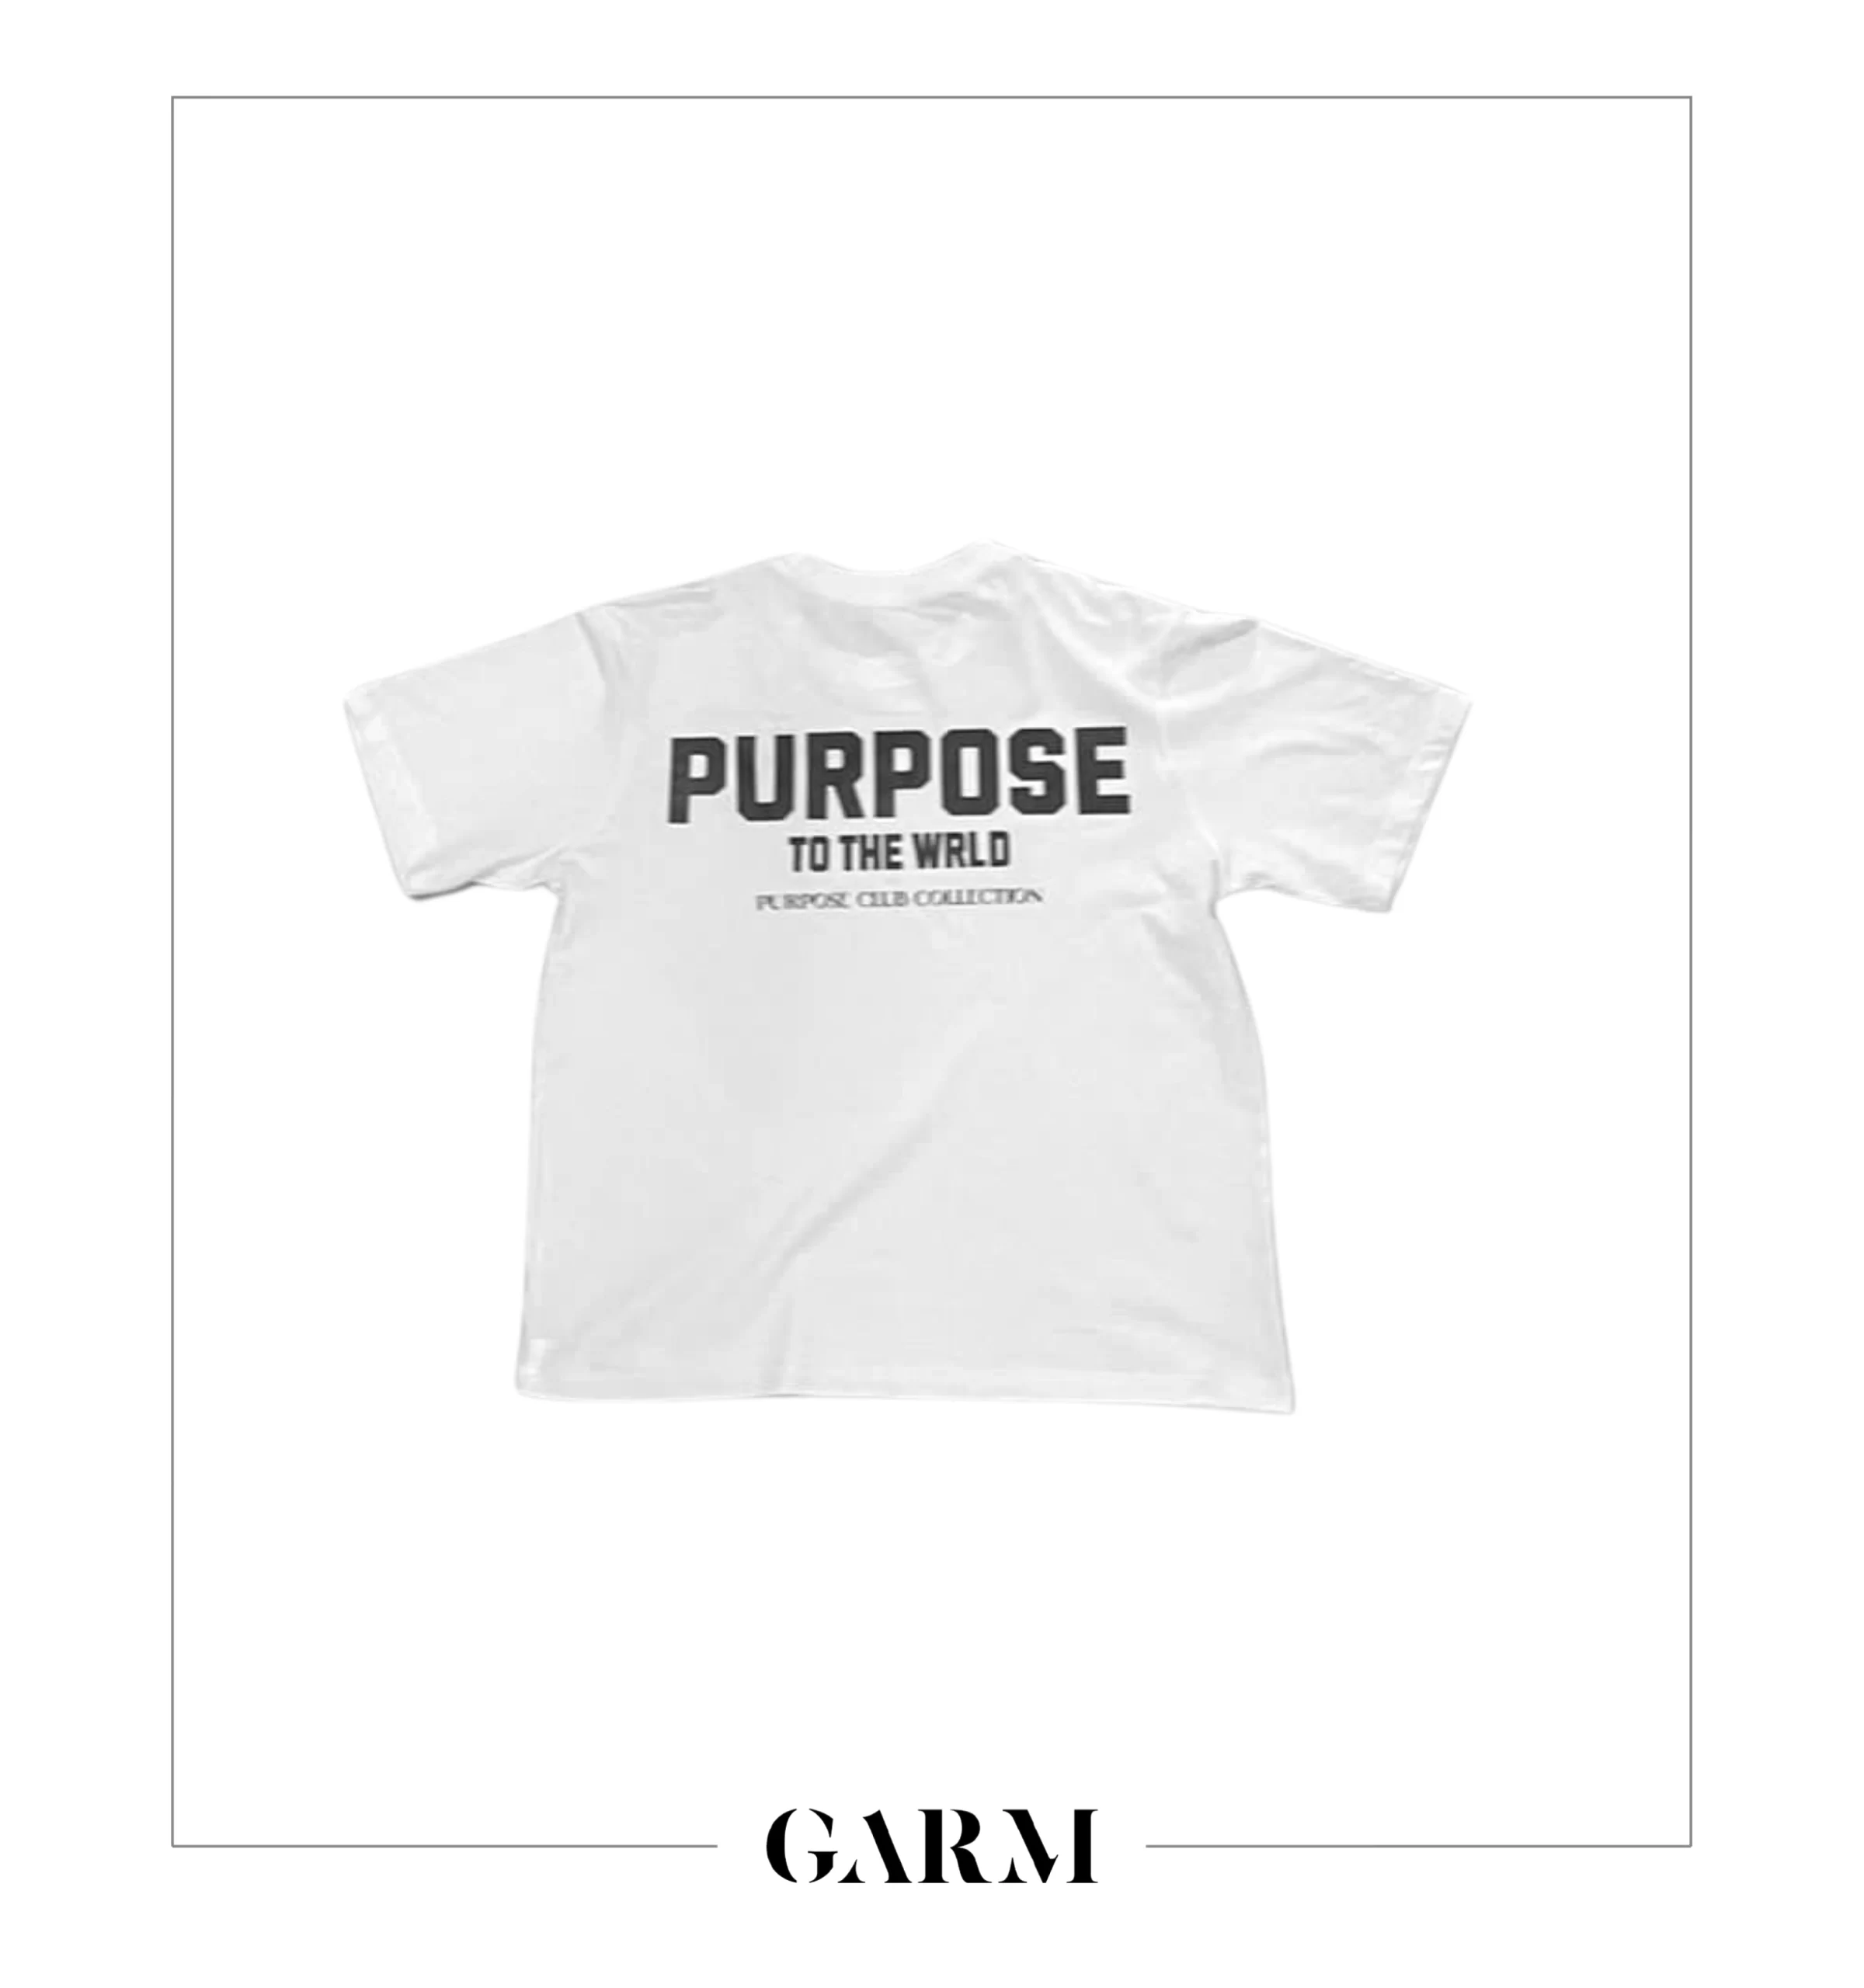 Purpose to the WRLD white tee’s available on Garm